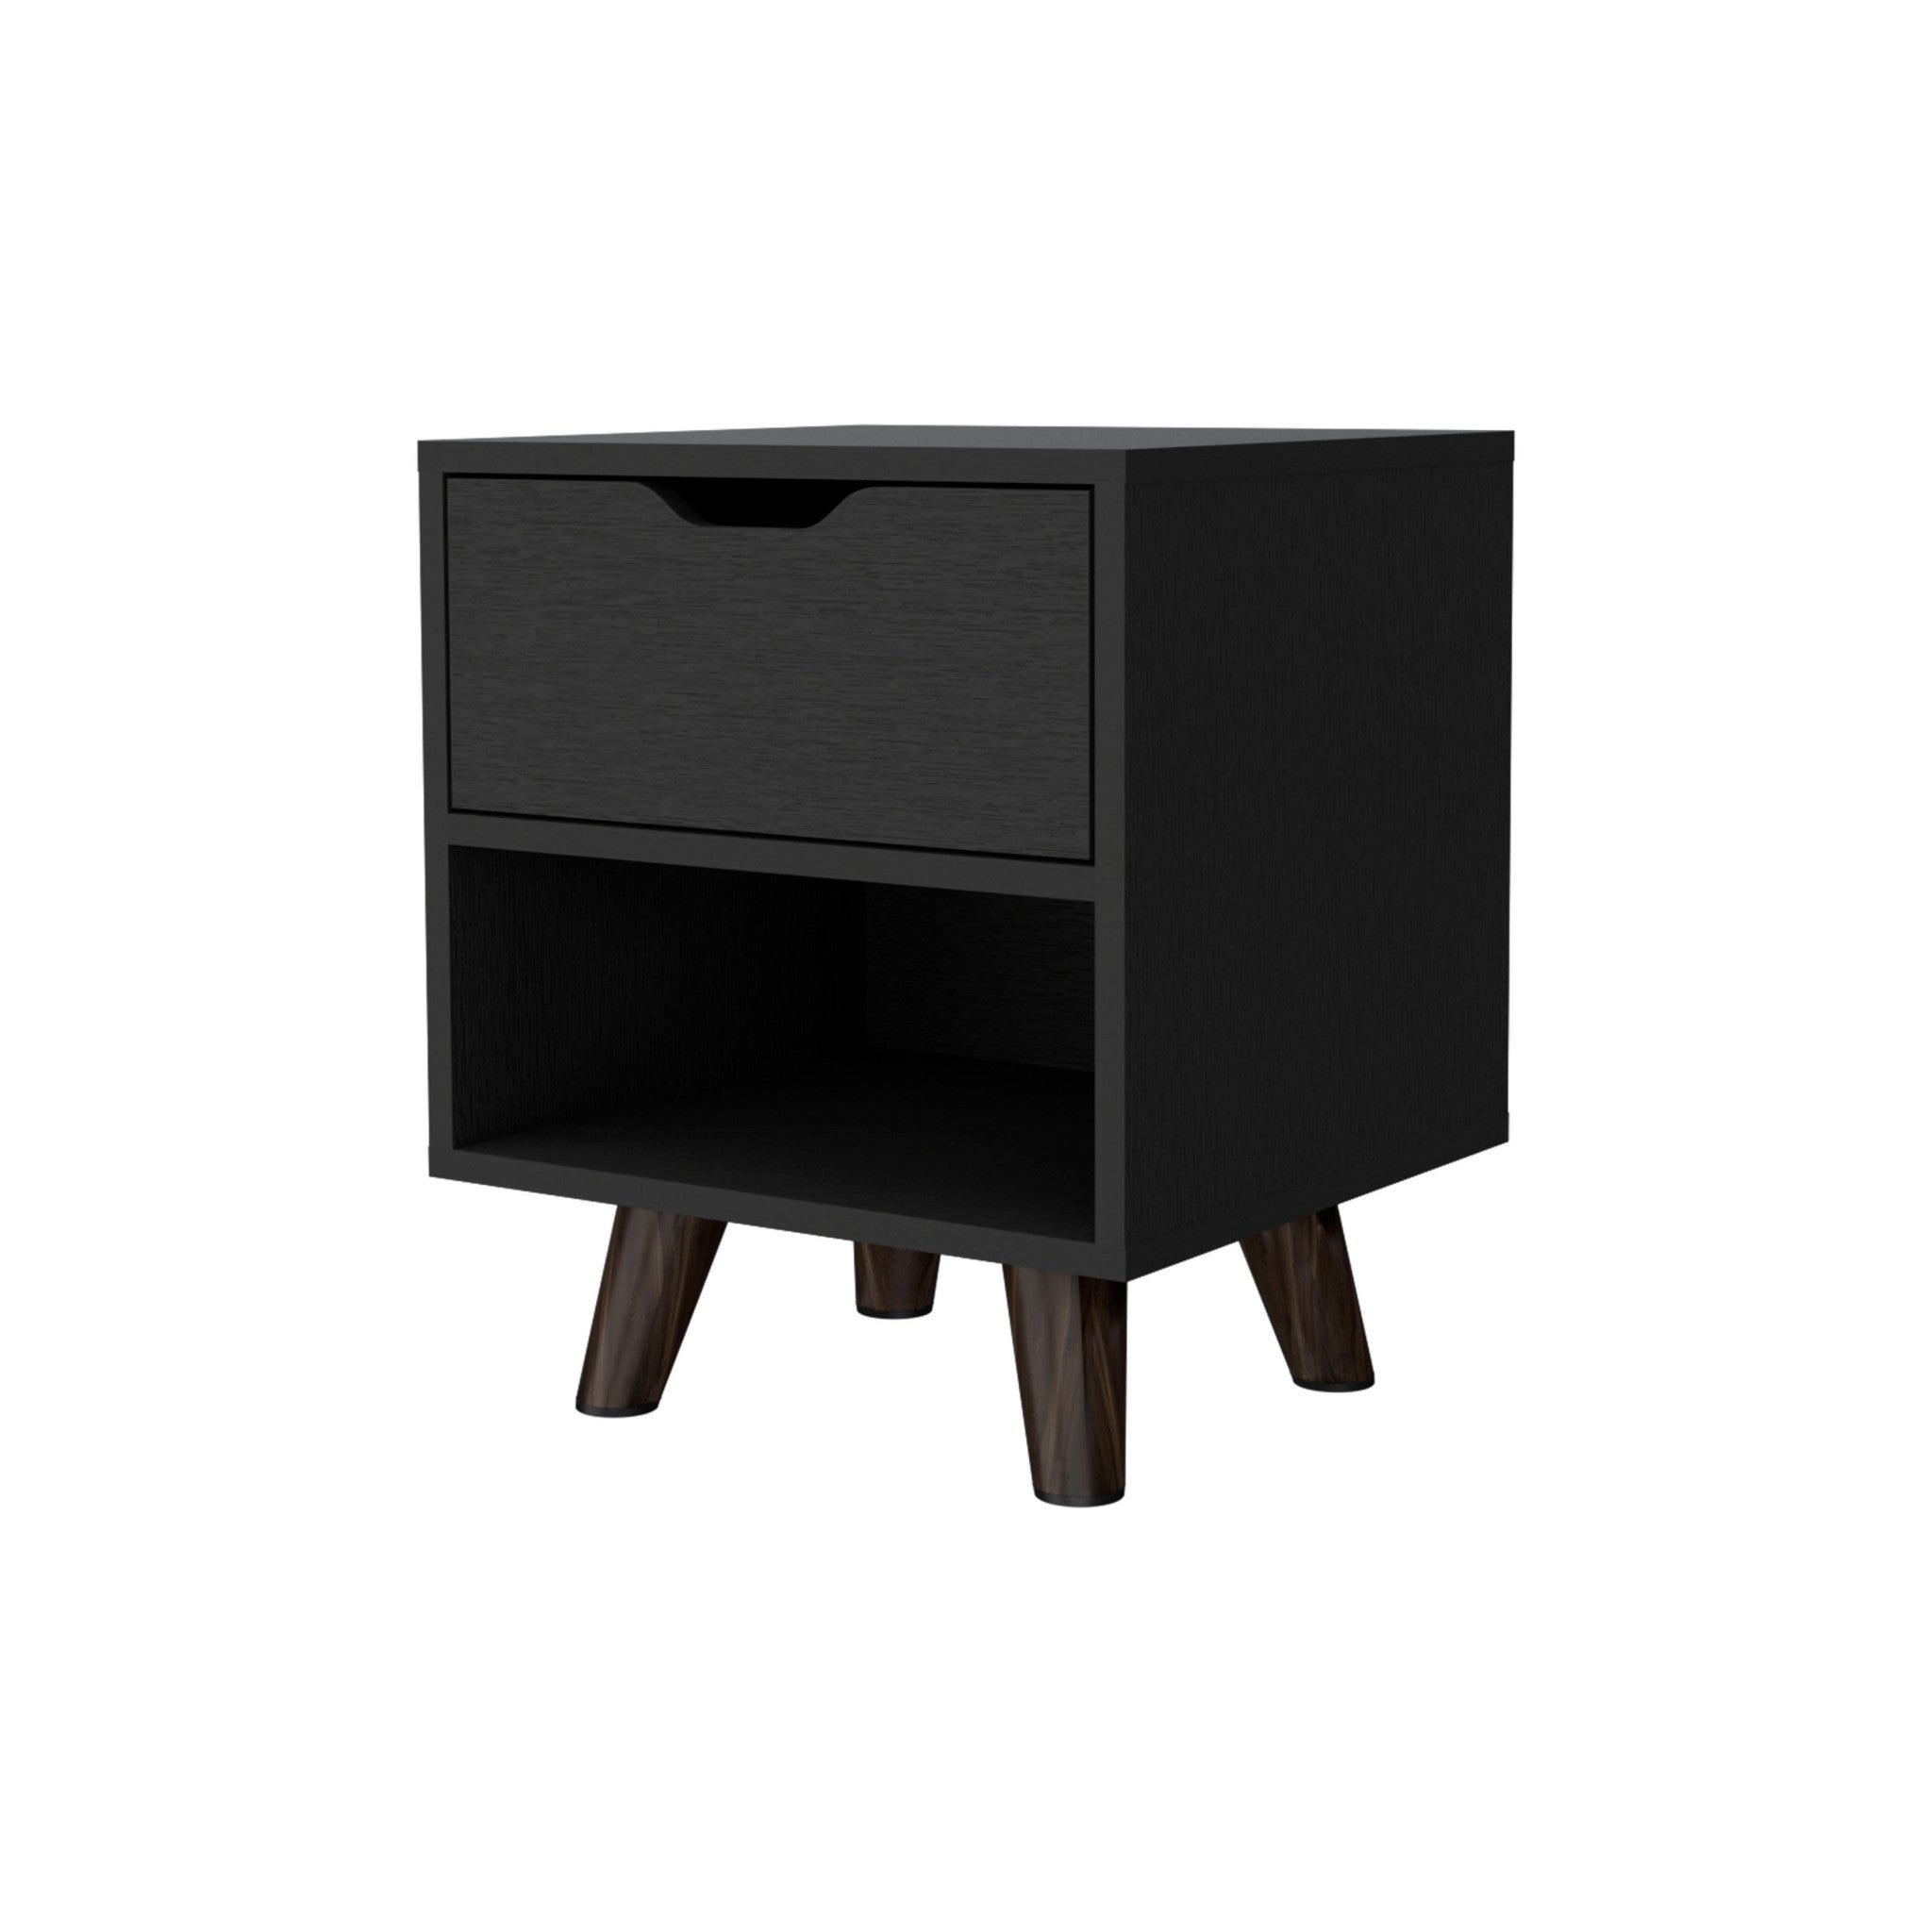 19" Black One Drawer Faux Wood Nightstand